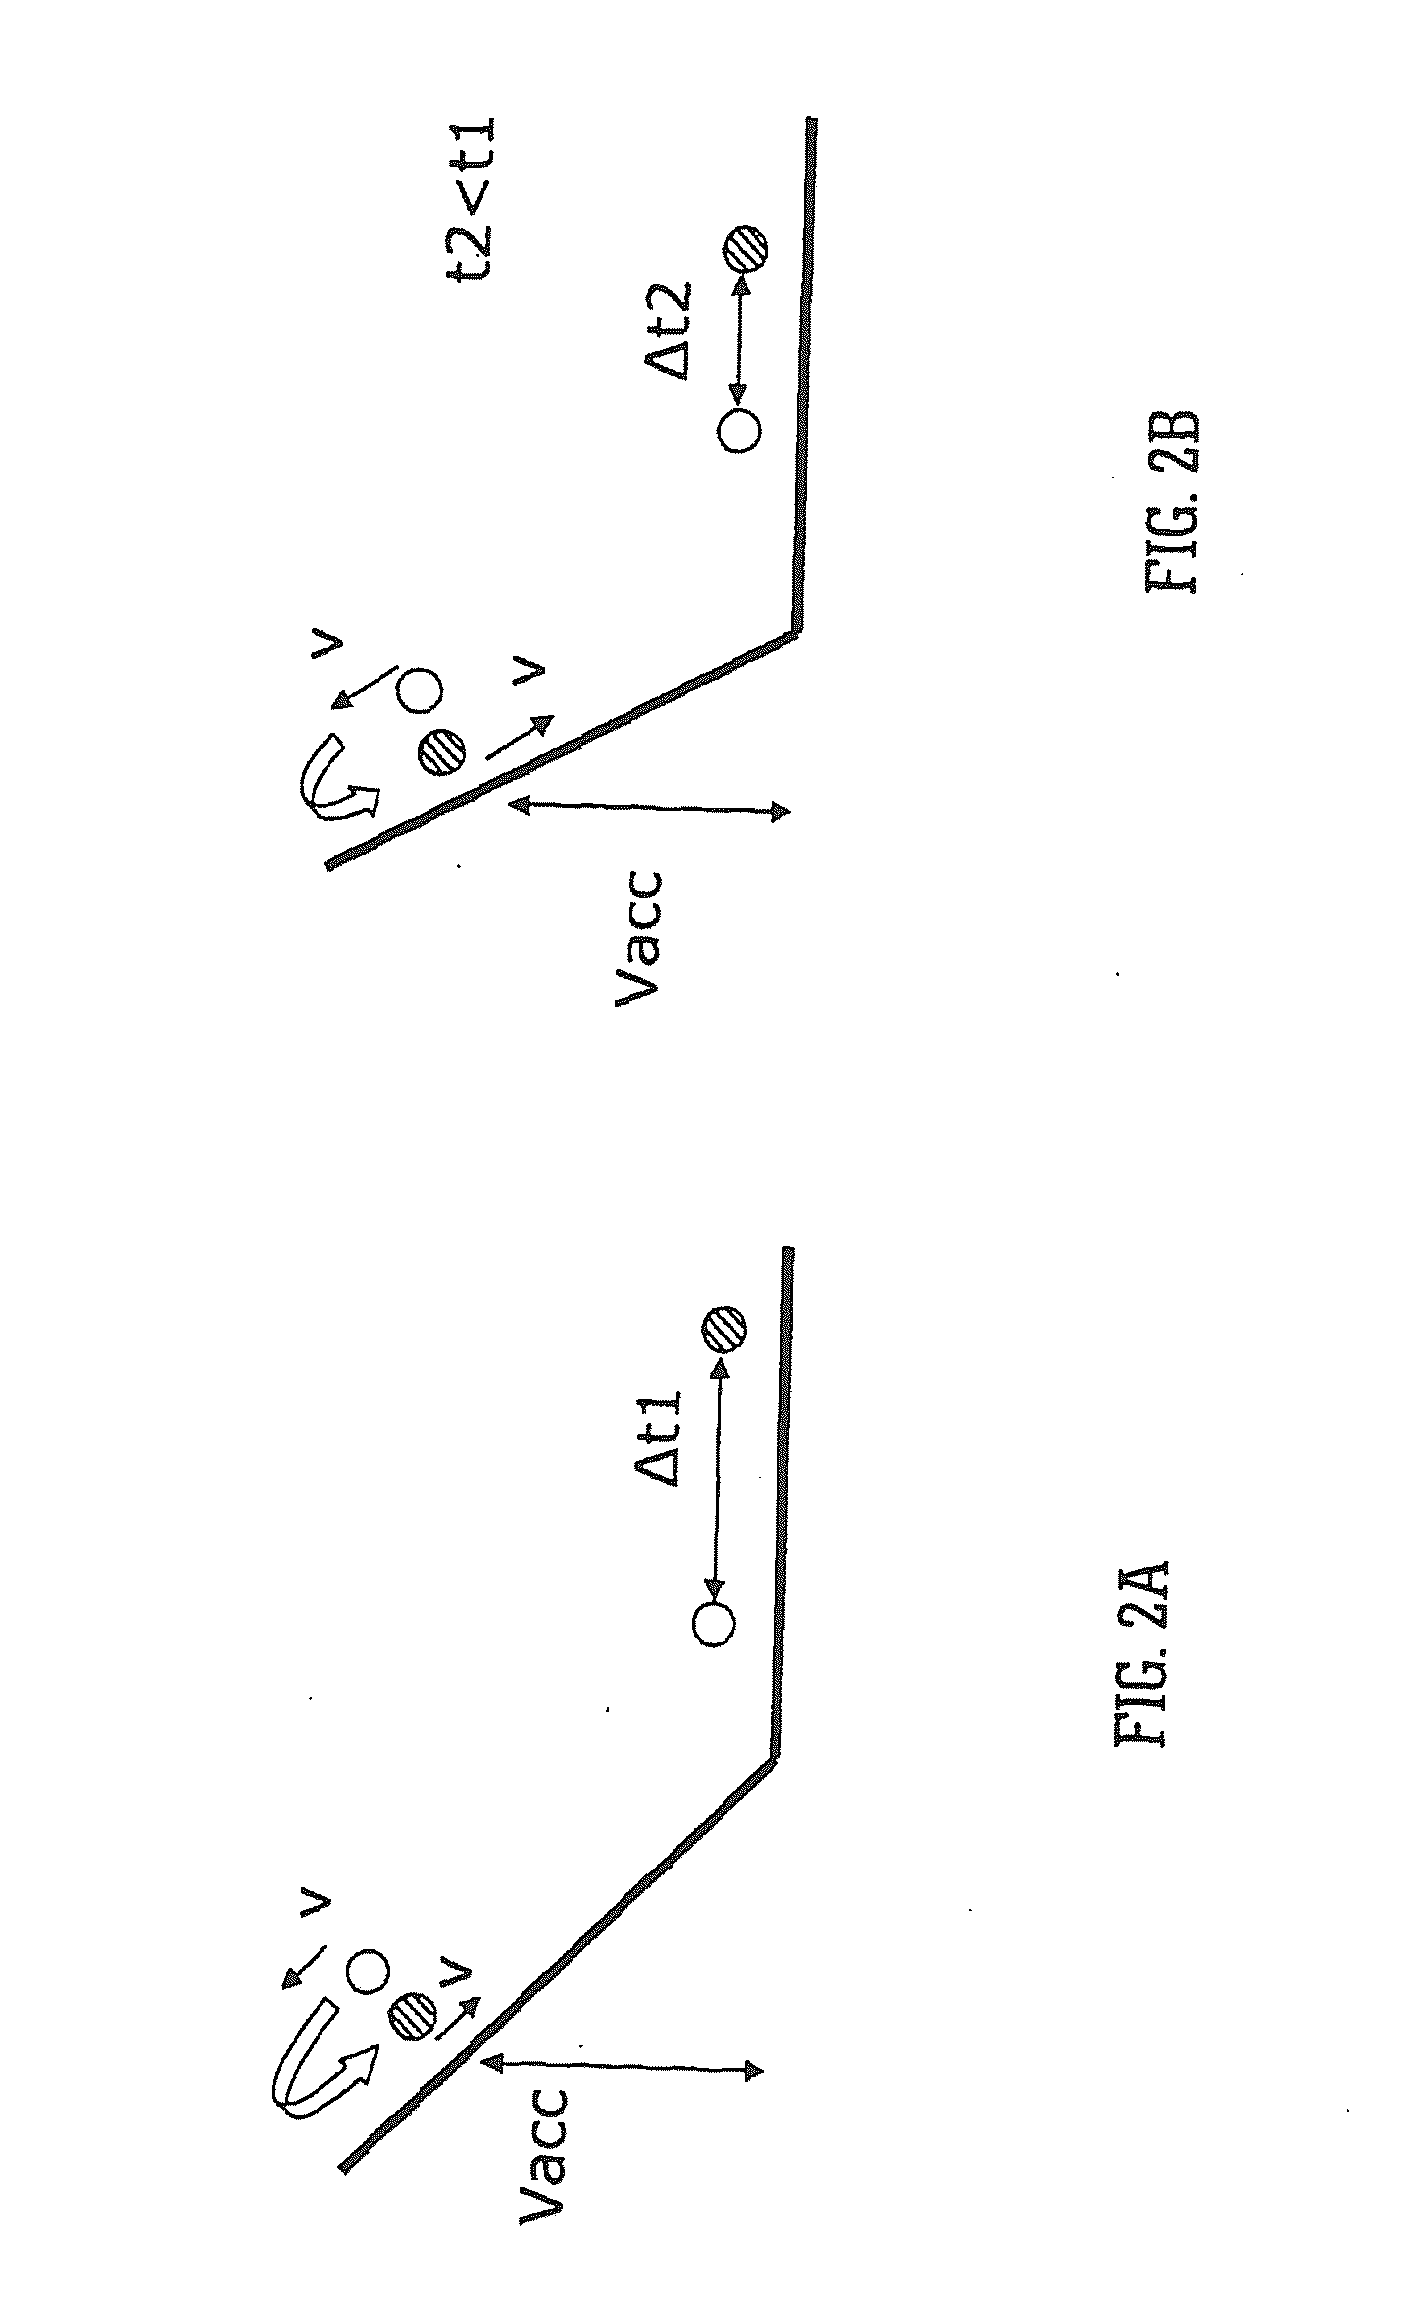 Mass Spectrometer With Beam Expander